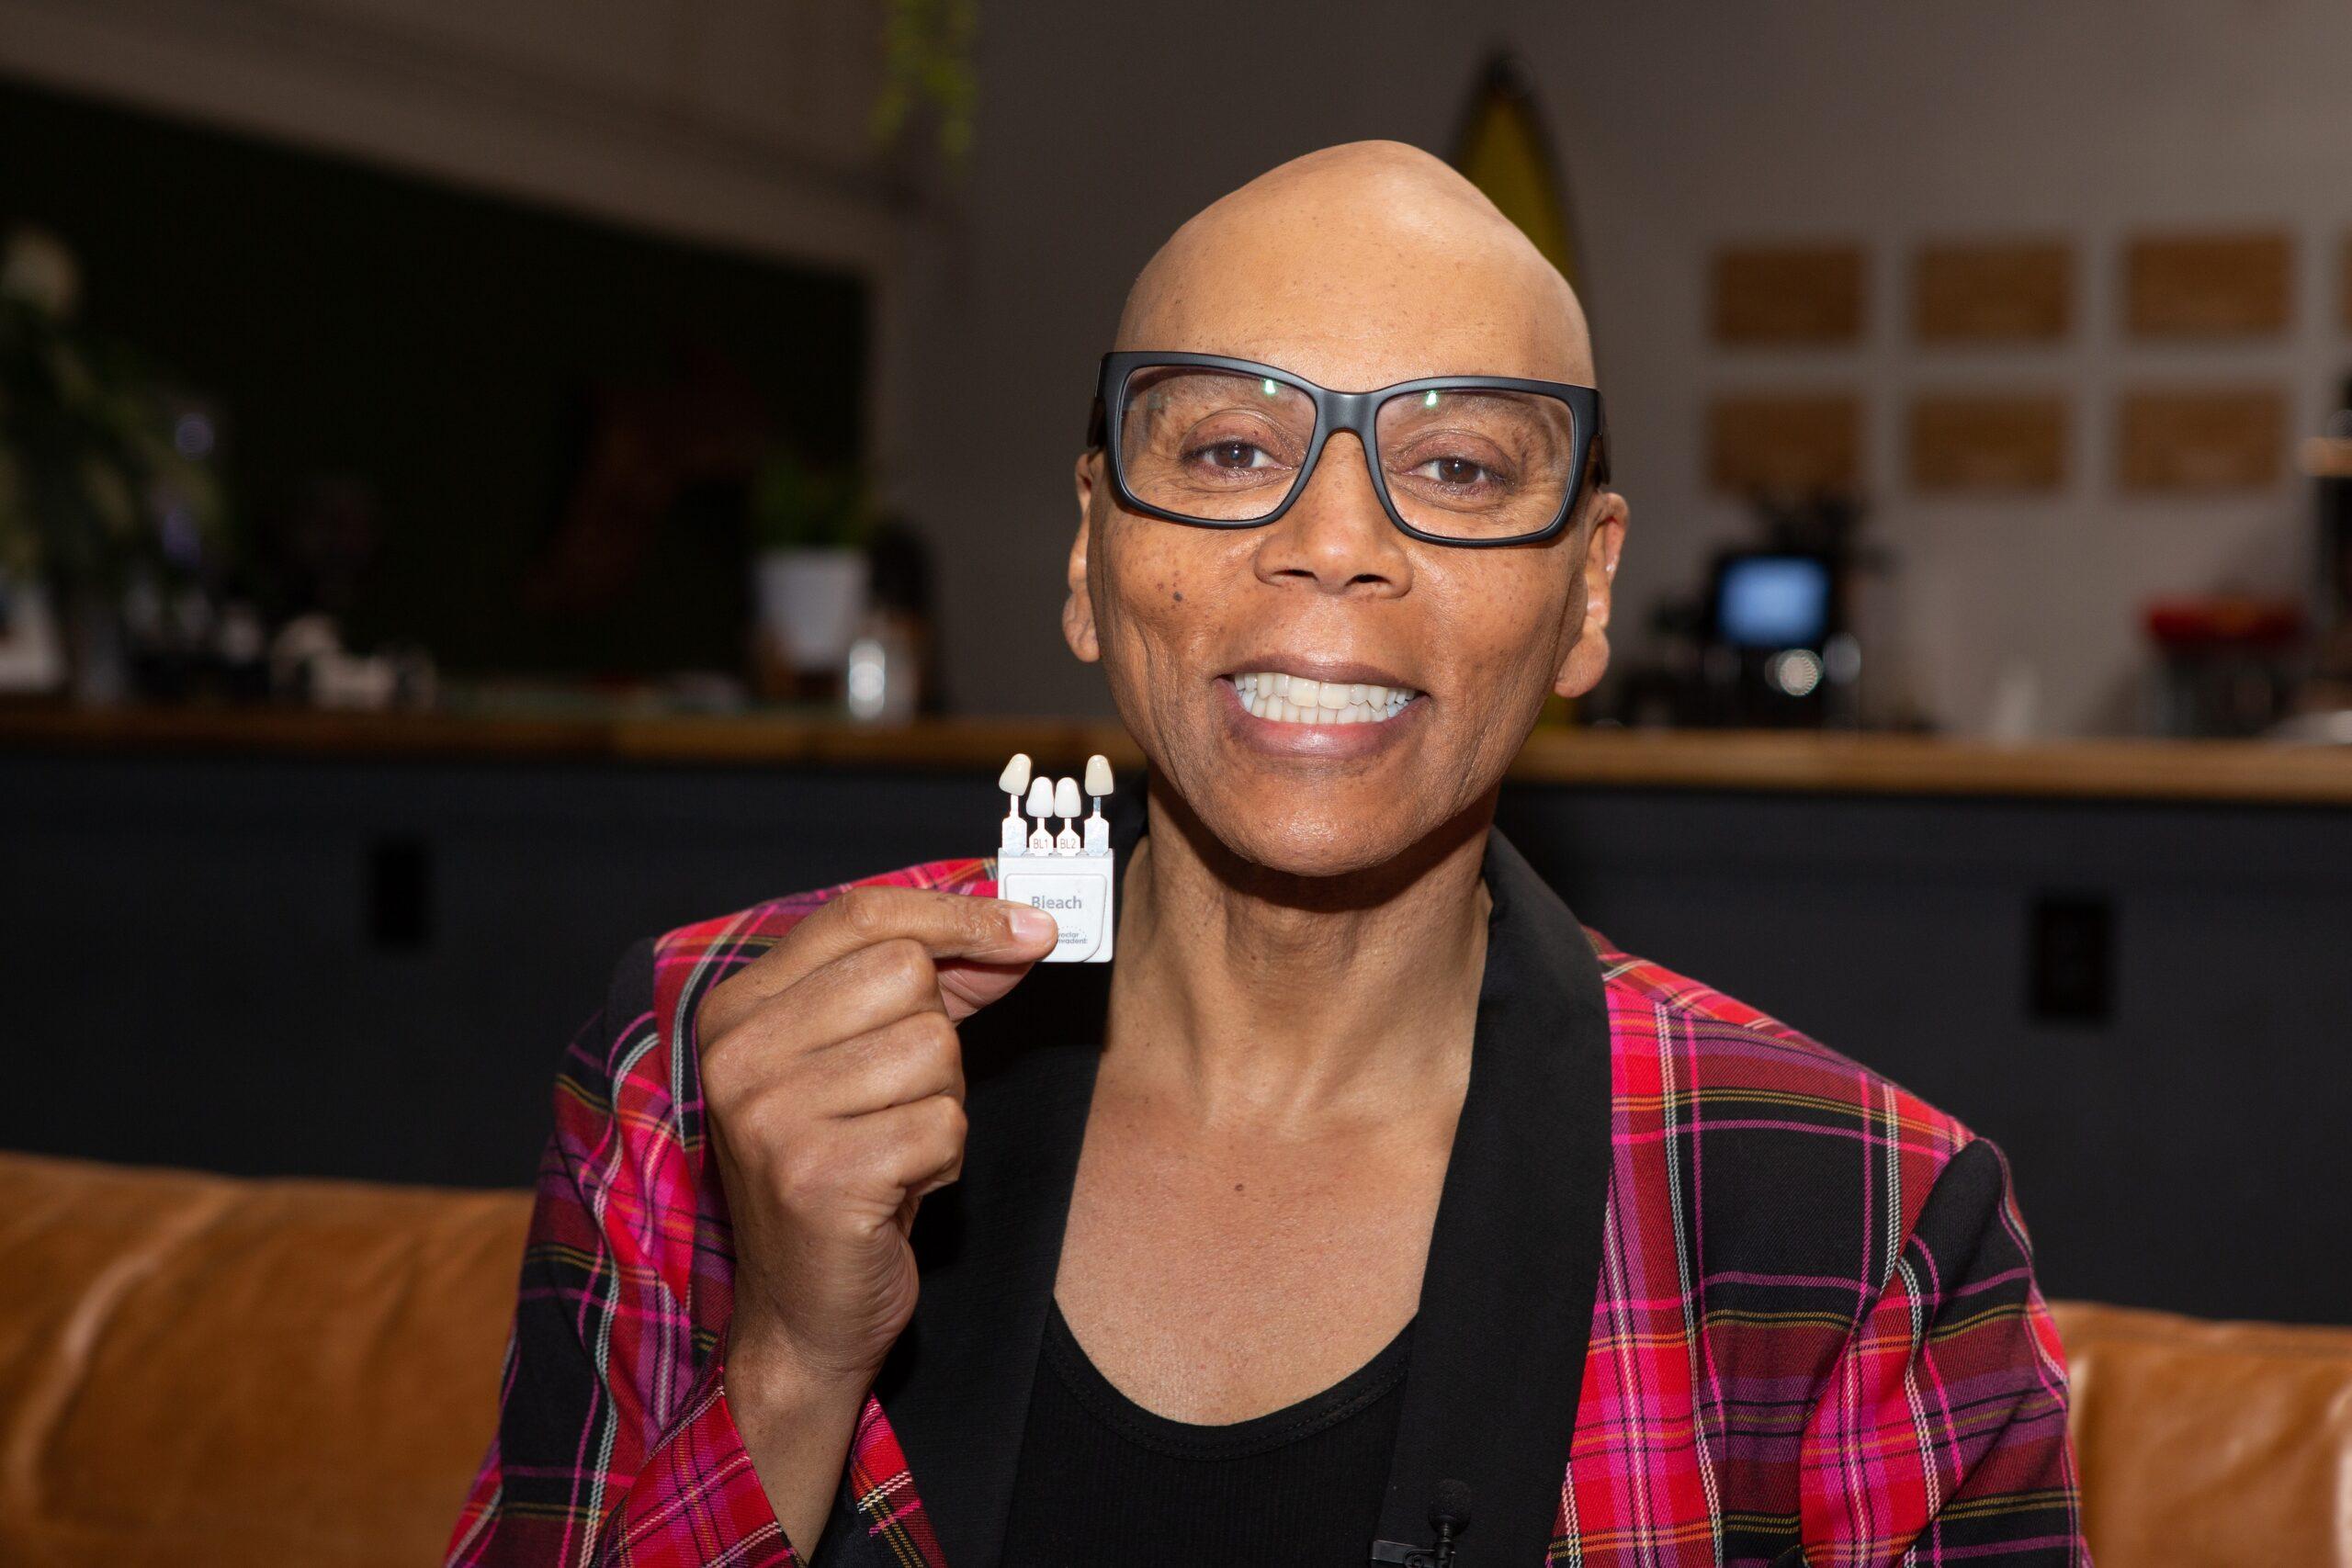 RuPaul reveals his male persona in new Las Vegas waxwork out of drag